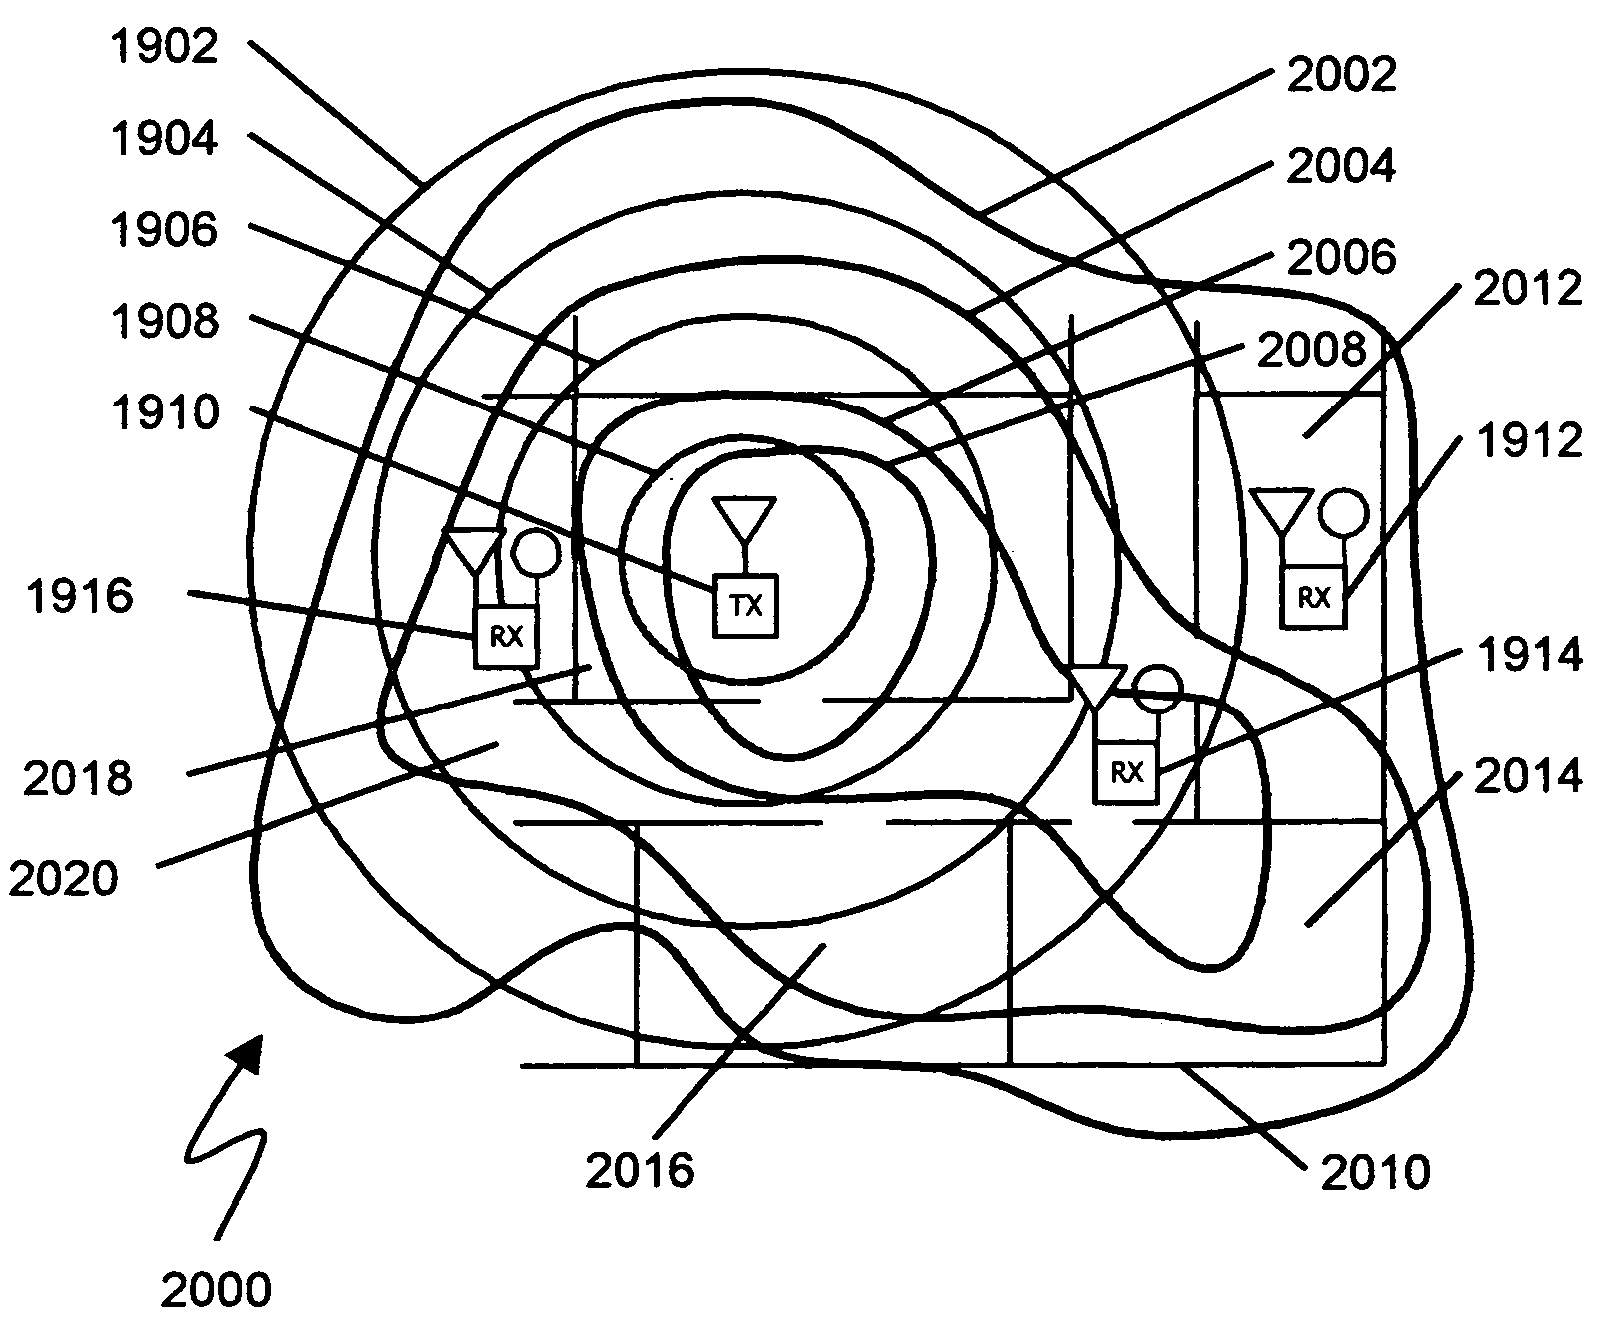 Near field electromagnetic positioning system and method